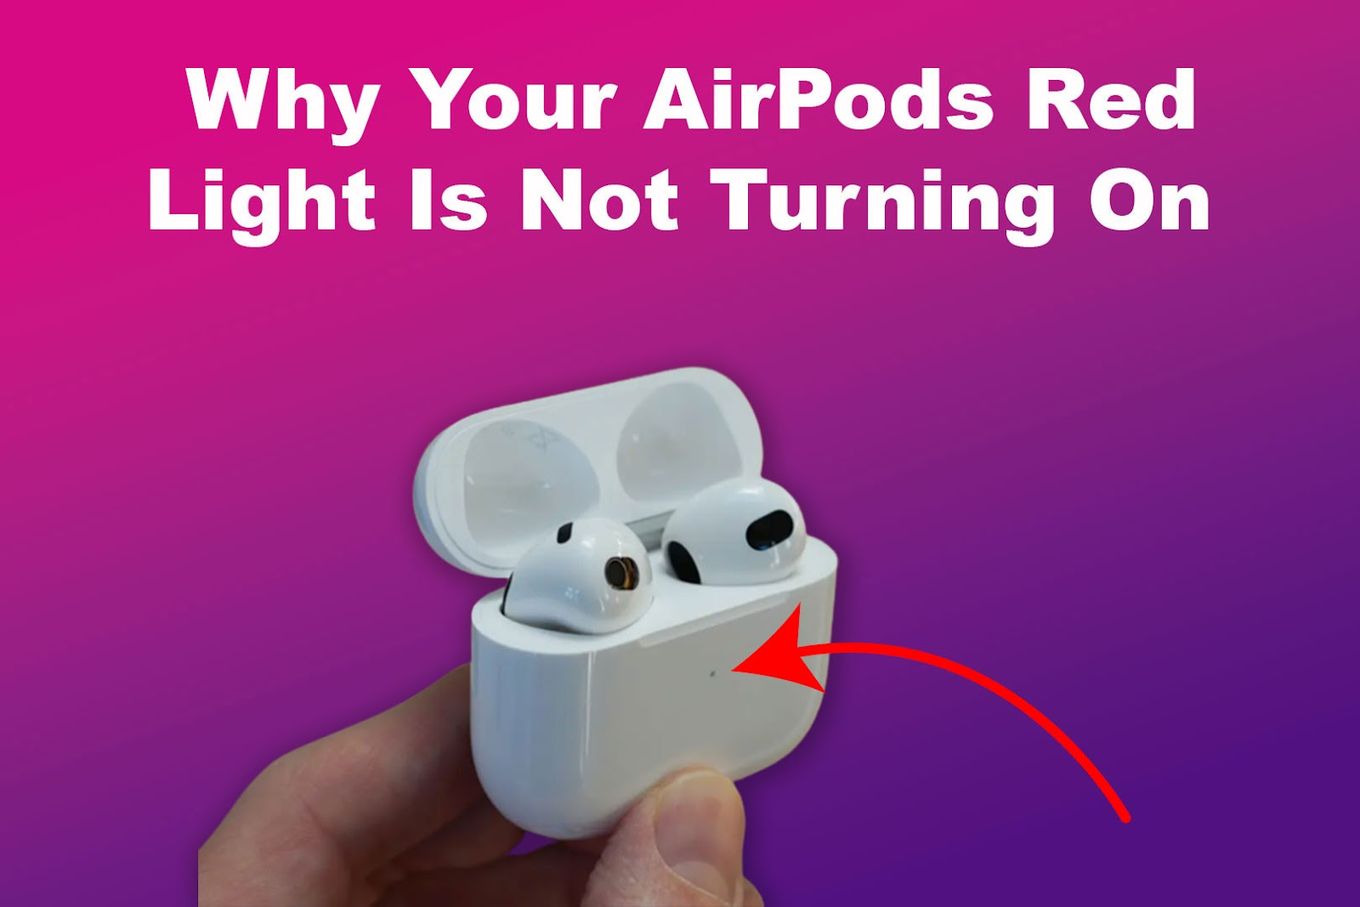 Why Your AirPods Red Light Is Not Turning On